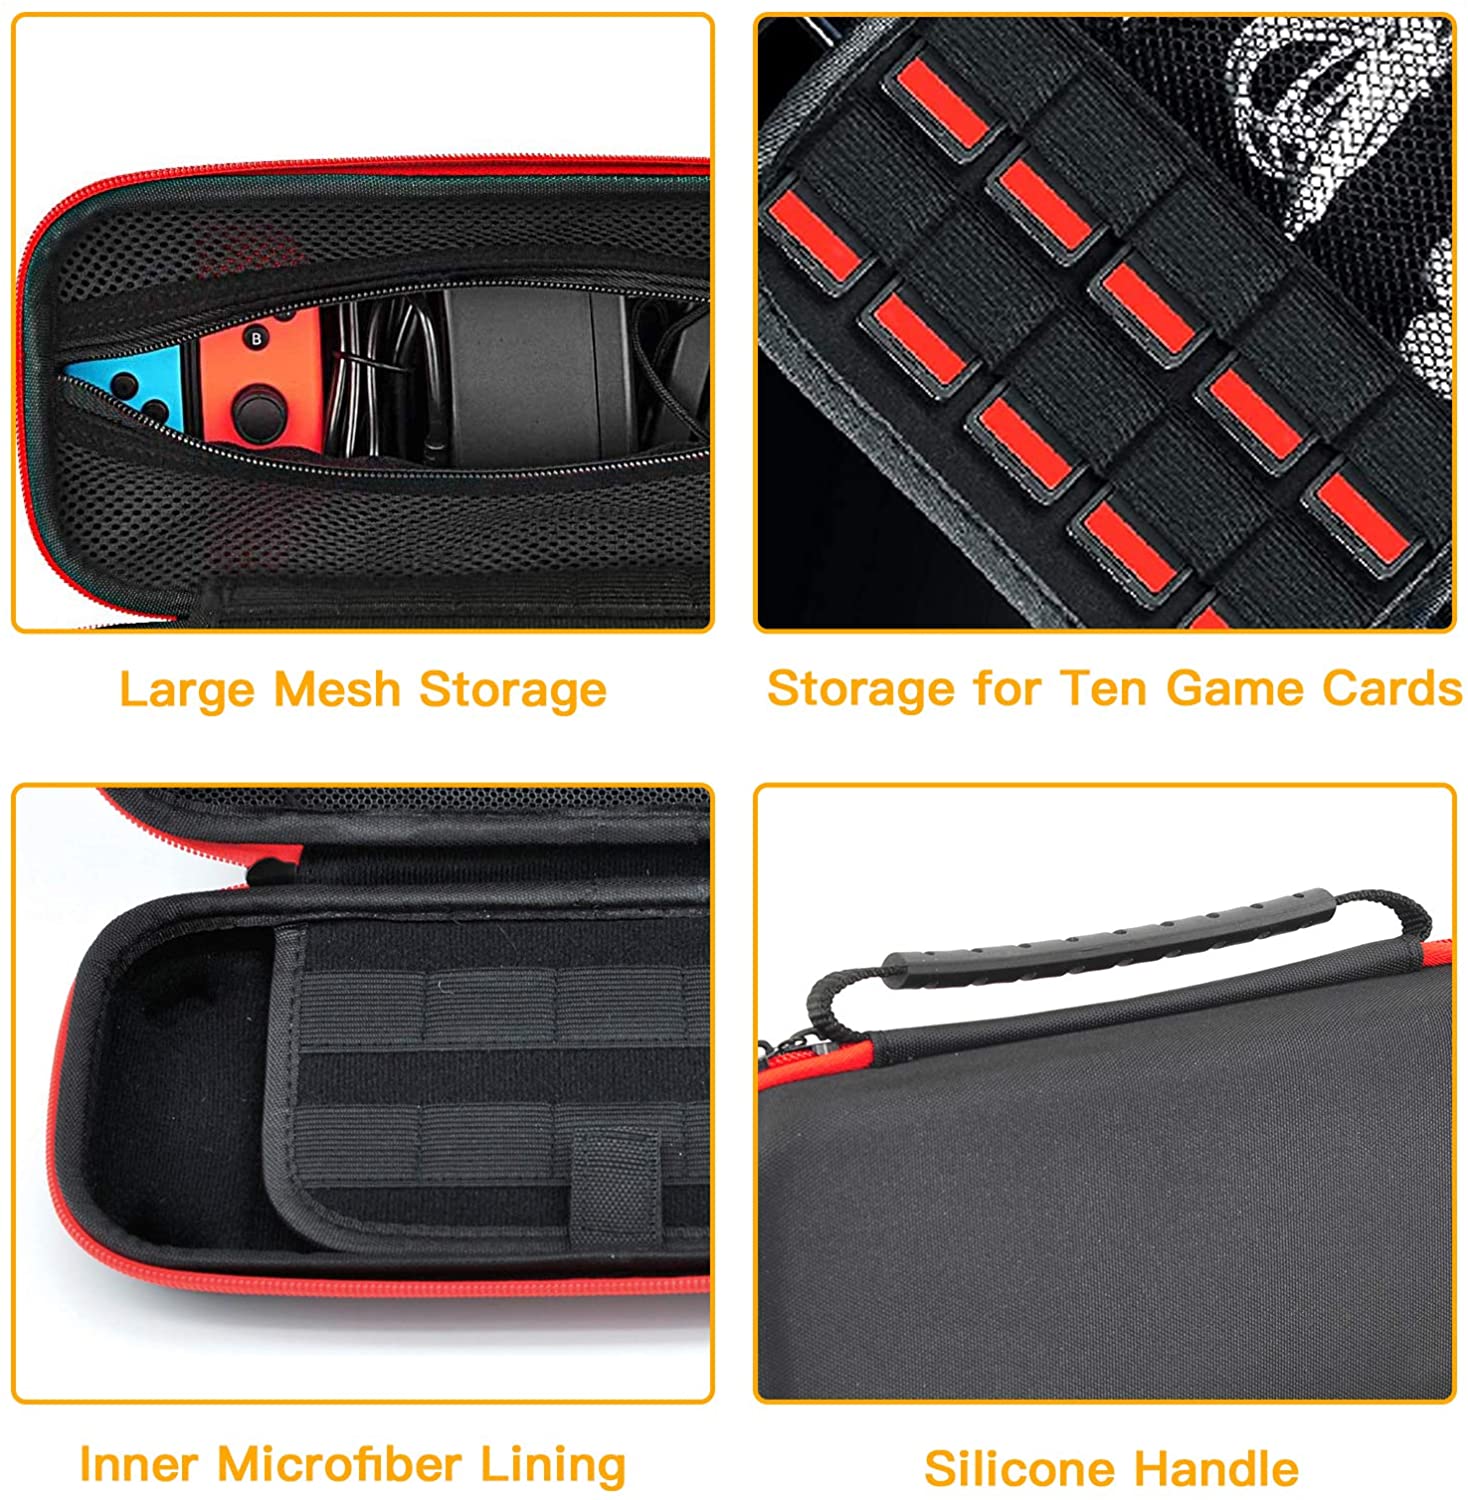 Carrying case has mesh pocket, 10 game card slots, compartments, and silicone handle.